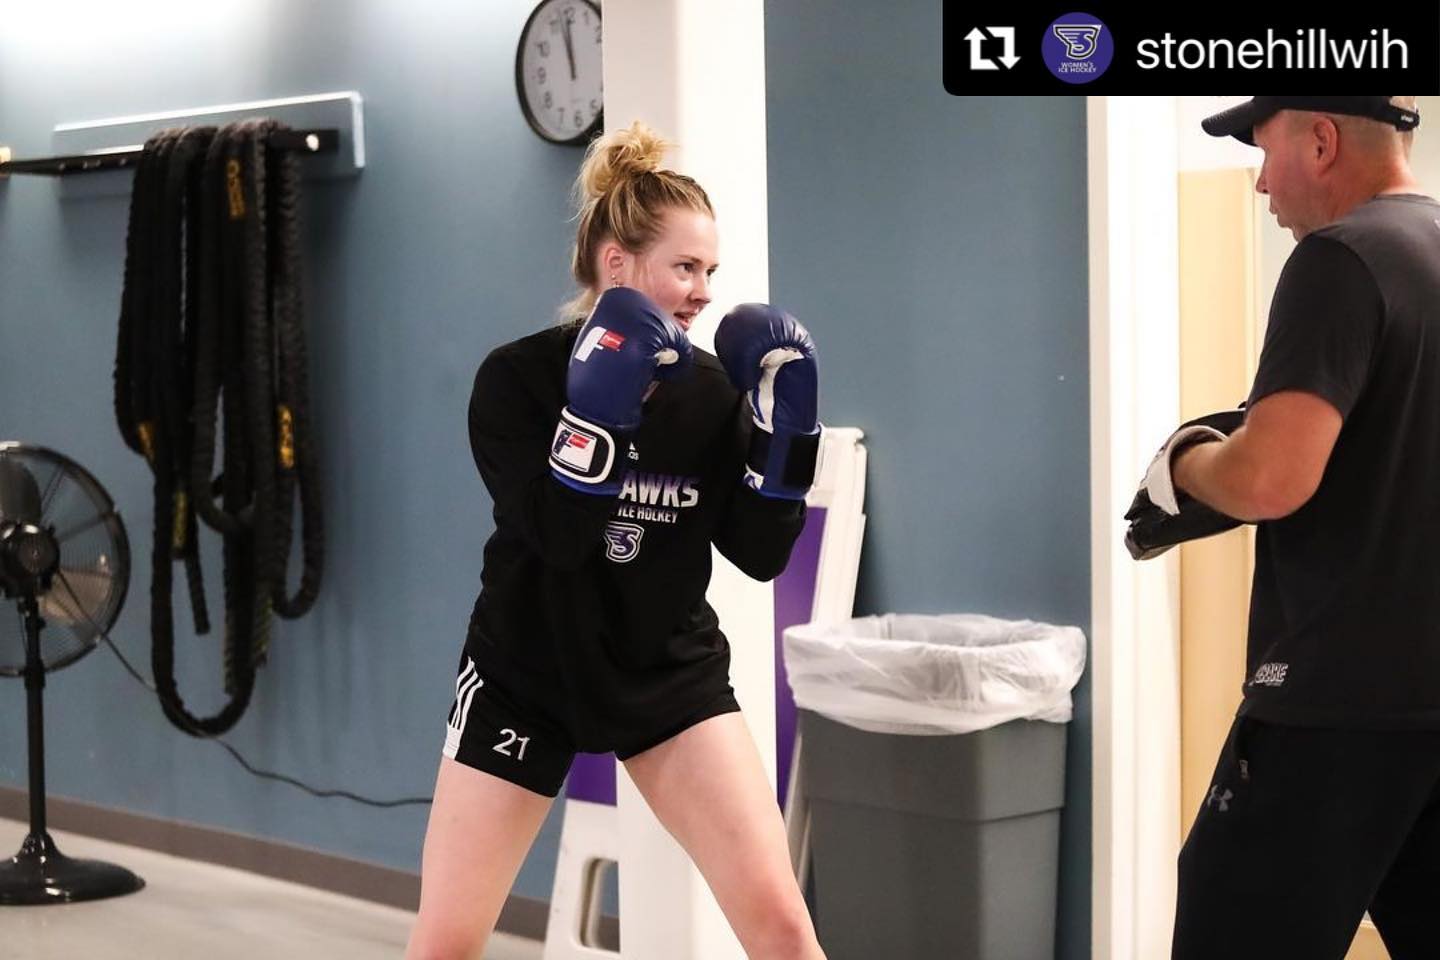 What a great time putting the Stonehill College Girls Hockey team through a group boxing workout and touch up their boxing skills. Best of luck this season @stonehillwih 🥊
wit @tommymcinerney @hawaipanese